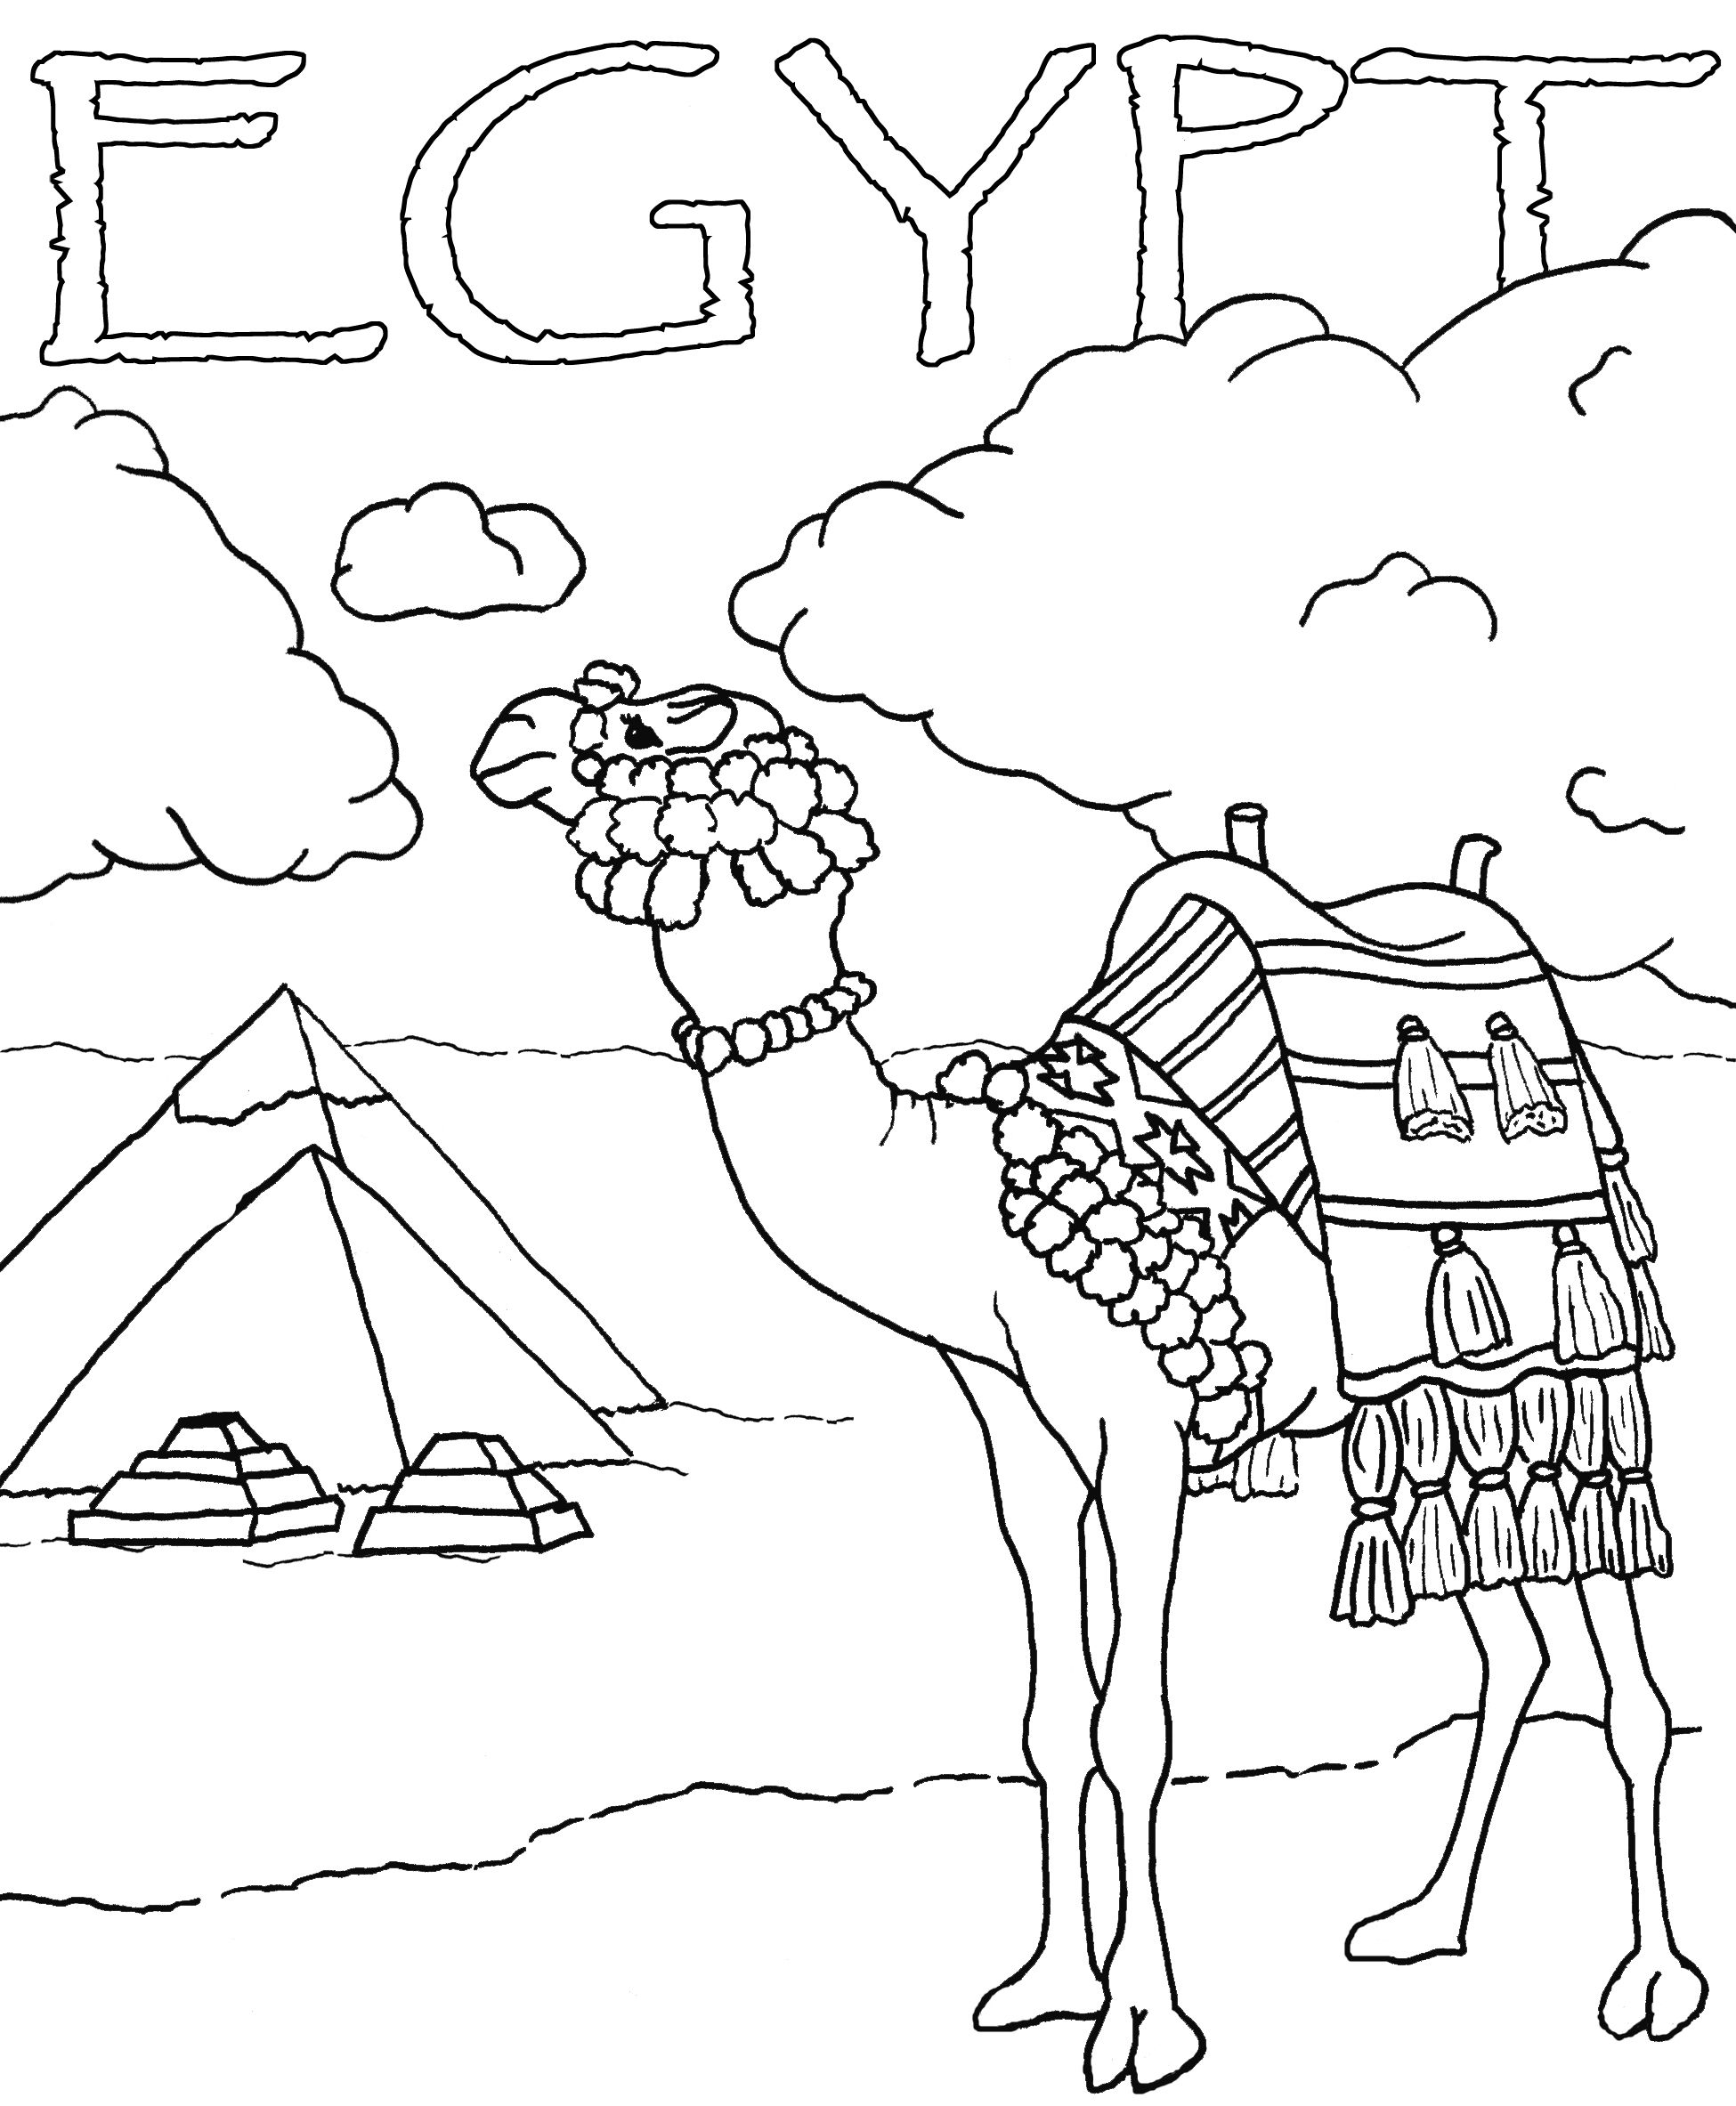 Ancient Egypt Coloring Pages Pdf Fish ...golfrealestateonline.com